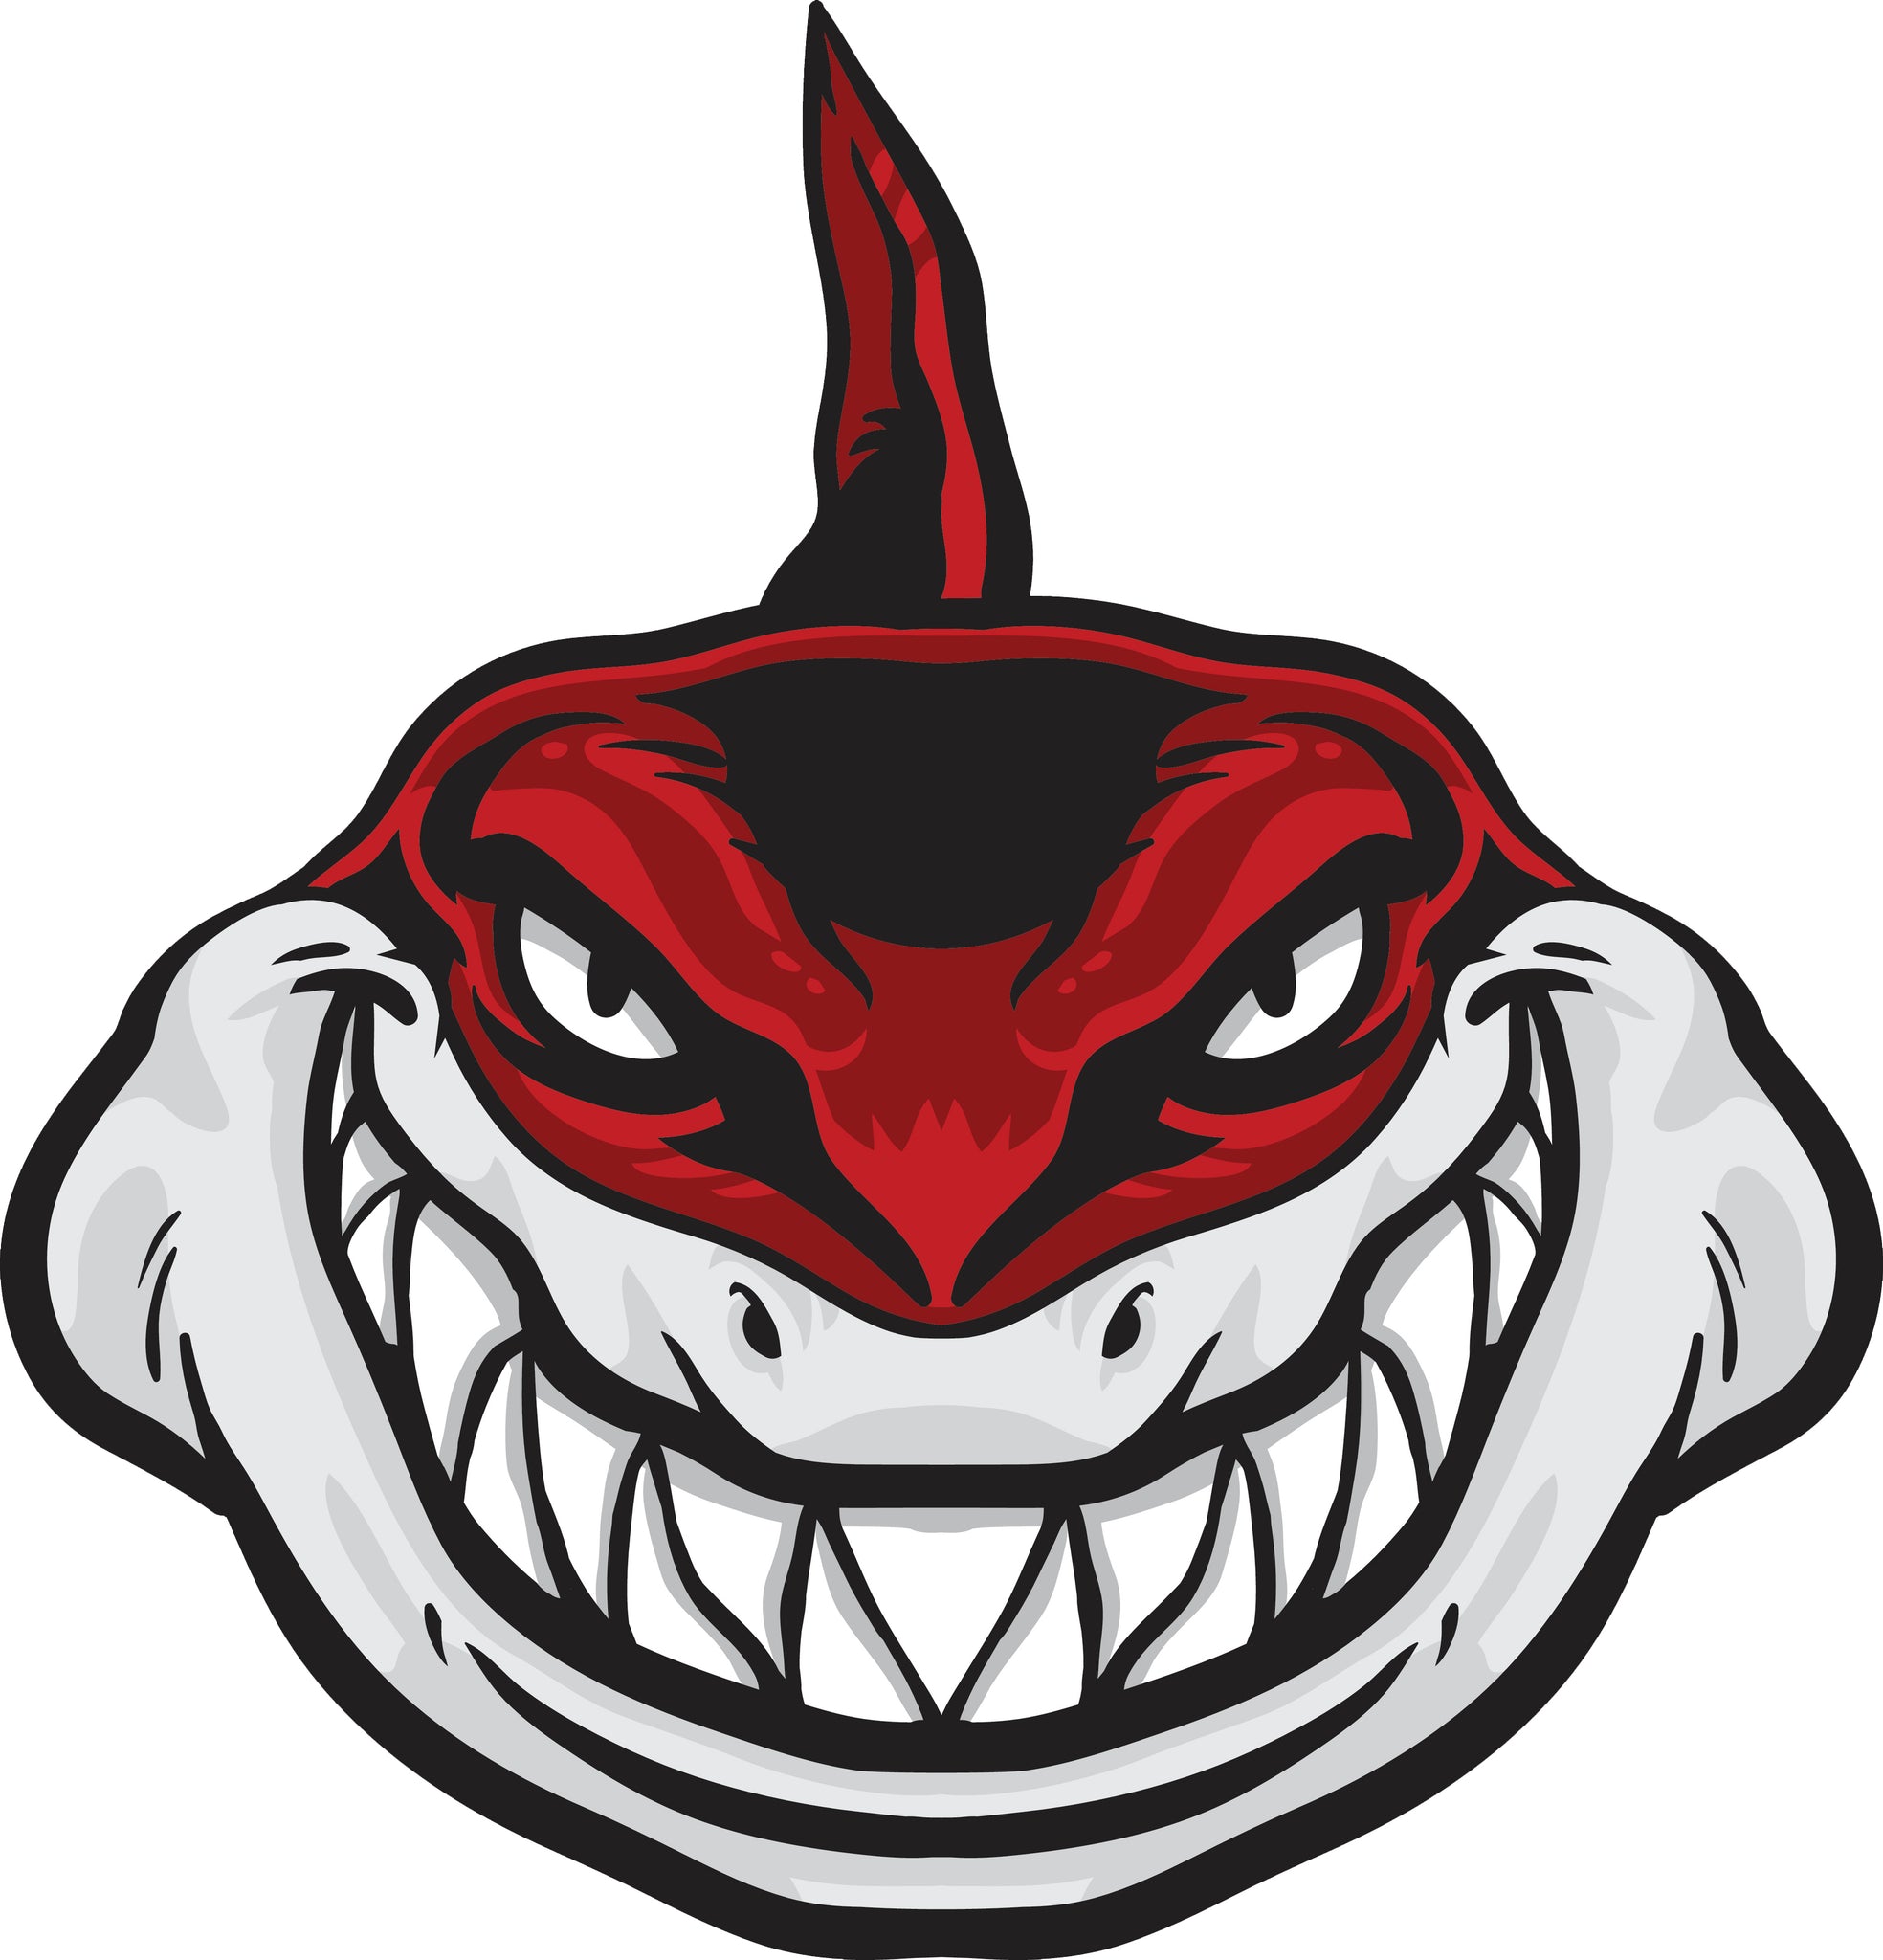 Creepy Scary Smiling Evil Shark - Red Vinyl Decal Sticker